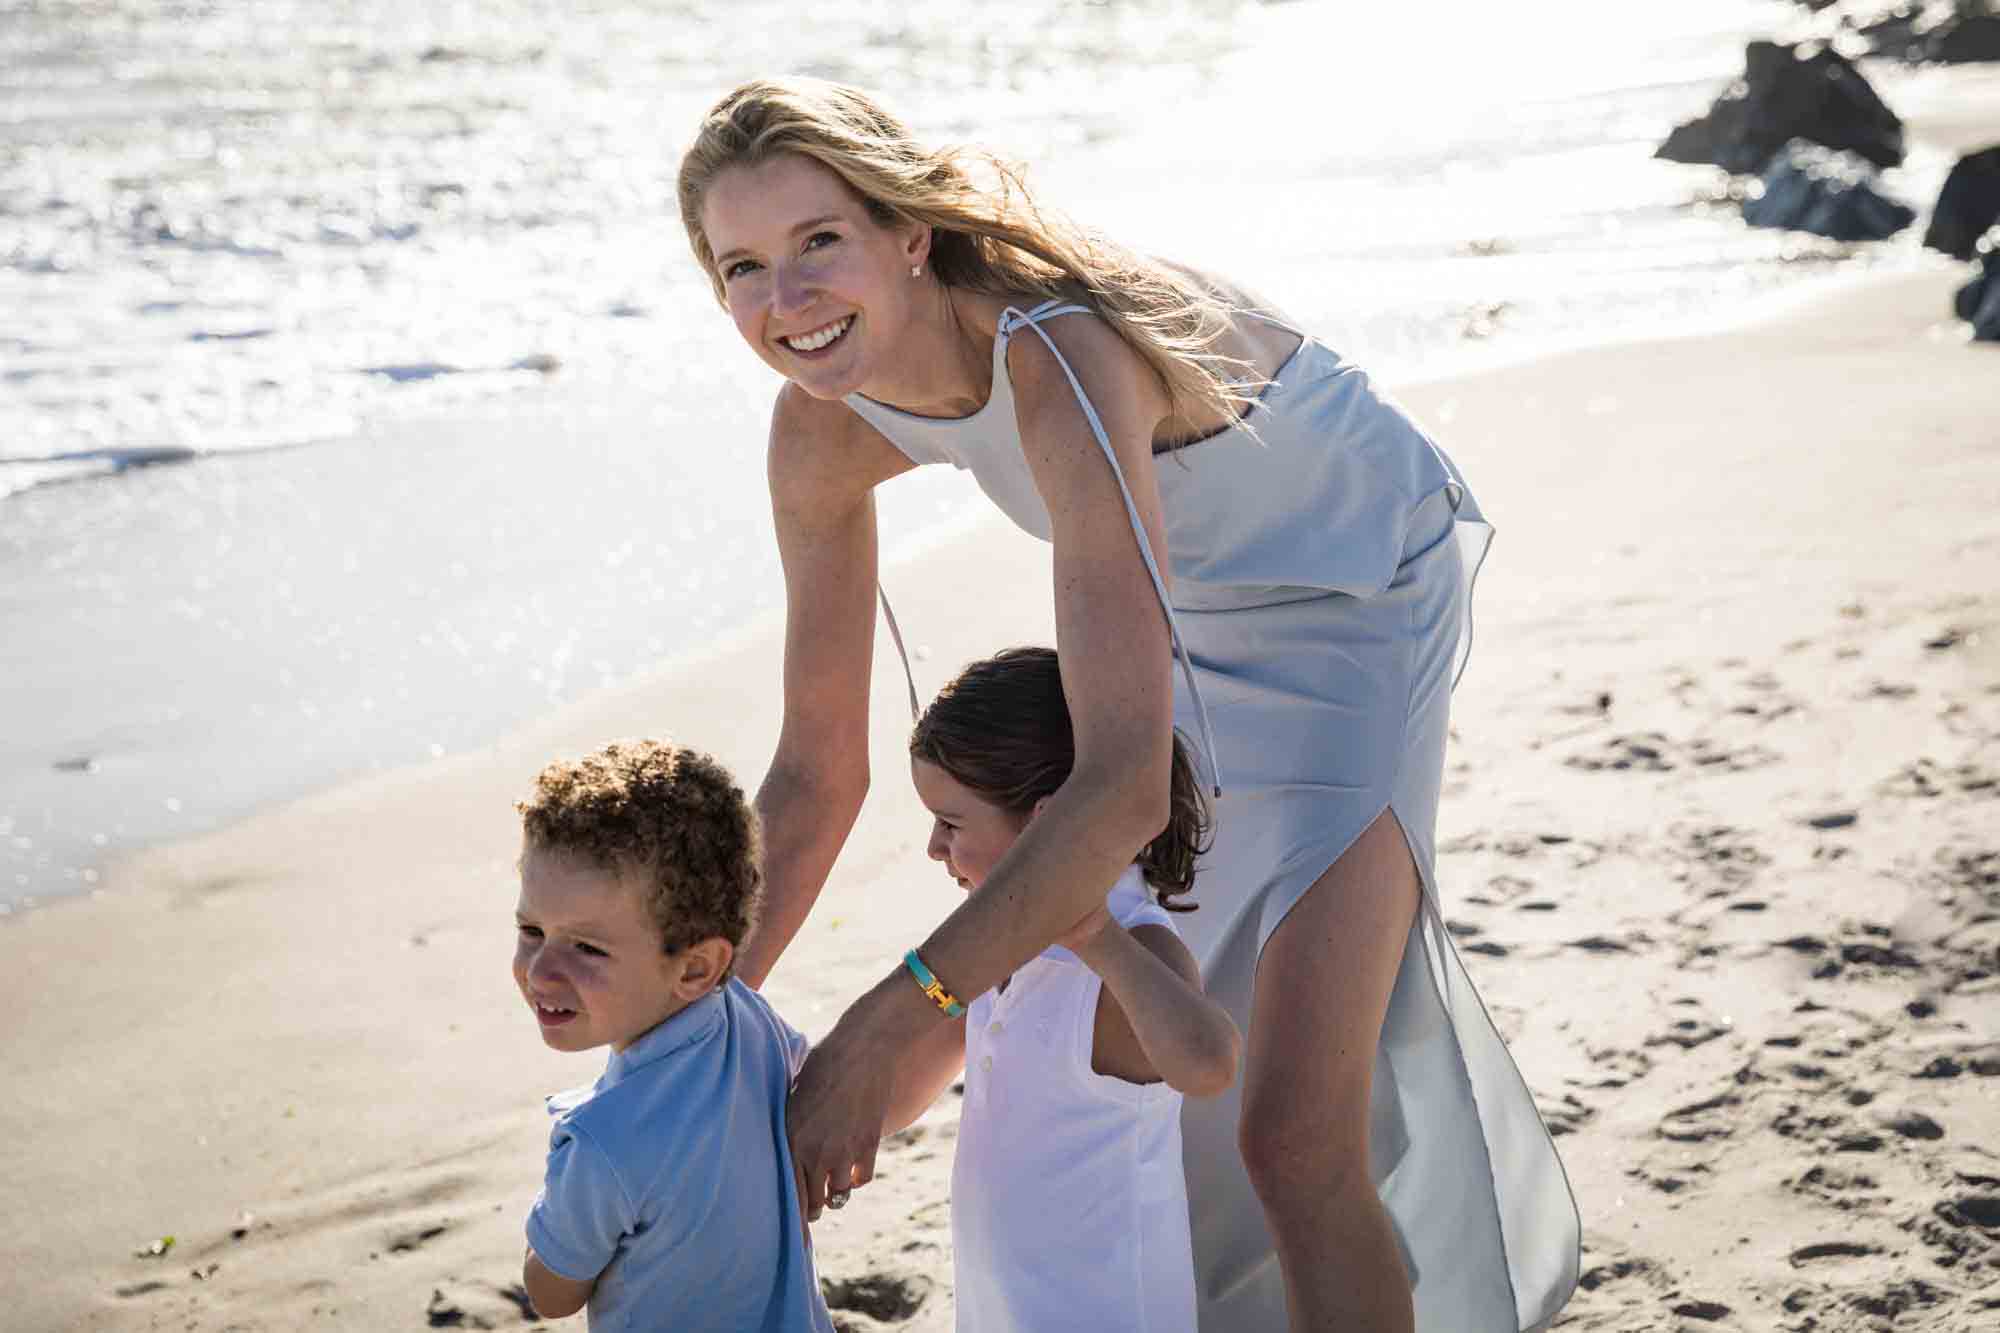 Mother with two small children on beach in front of ocean for an article on beach family portrait tips